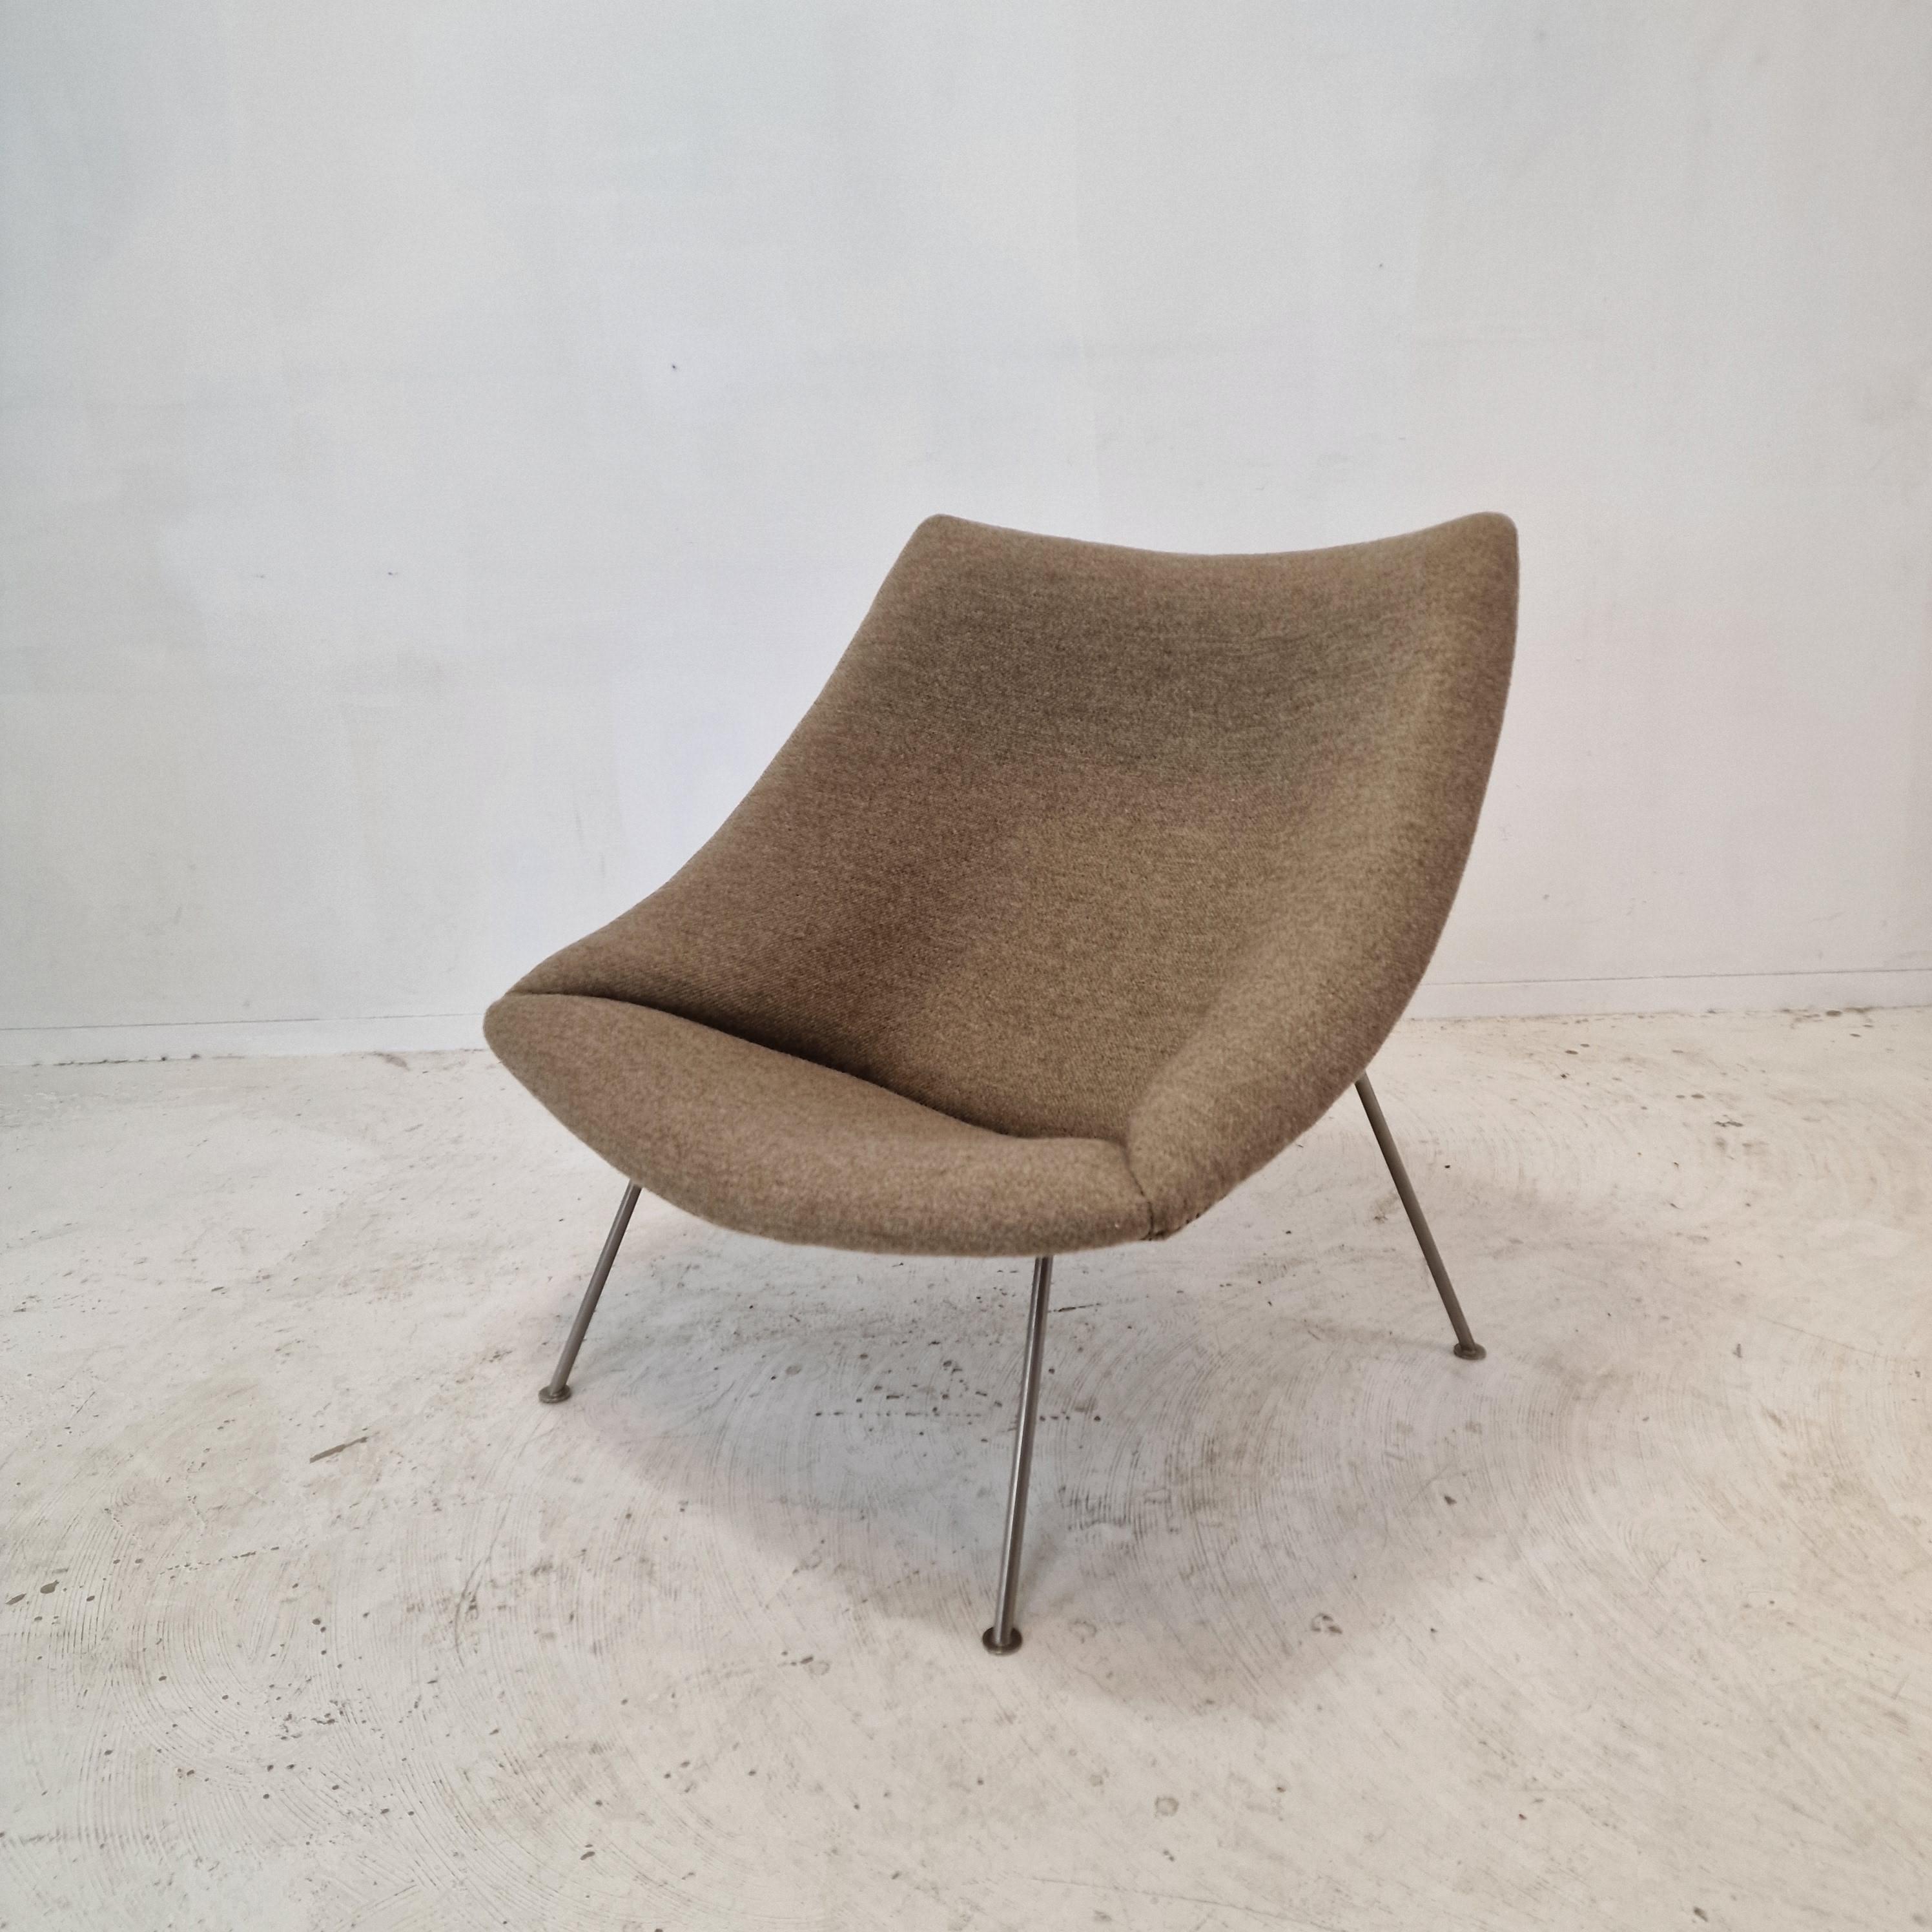 A beautiful Artifort Oyster chair.  

This very comfortable chair is designed by Pierre Paulin and fabricated by Artifort.  
This particular piece is manufactured in the 60's it has nickel metal legs.

It is just restored with new fabric and new